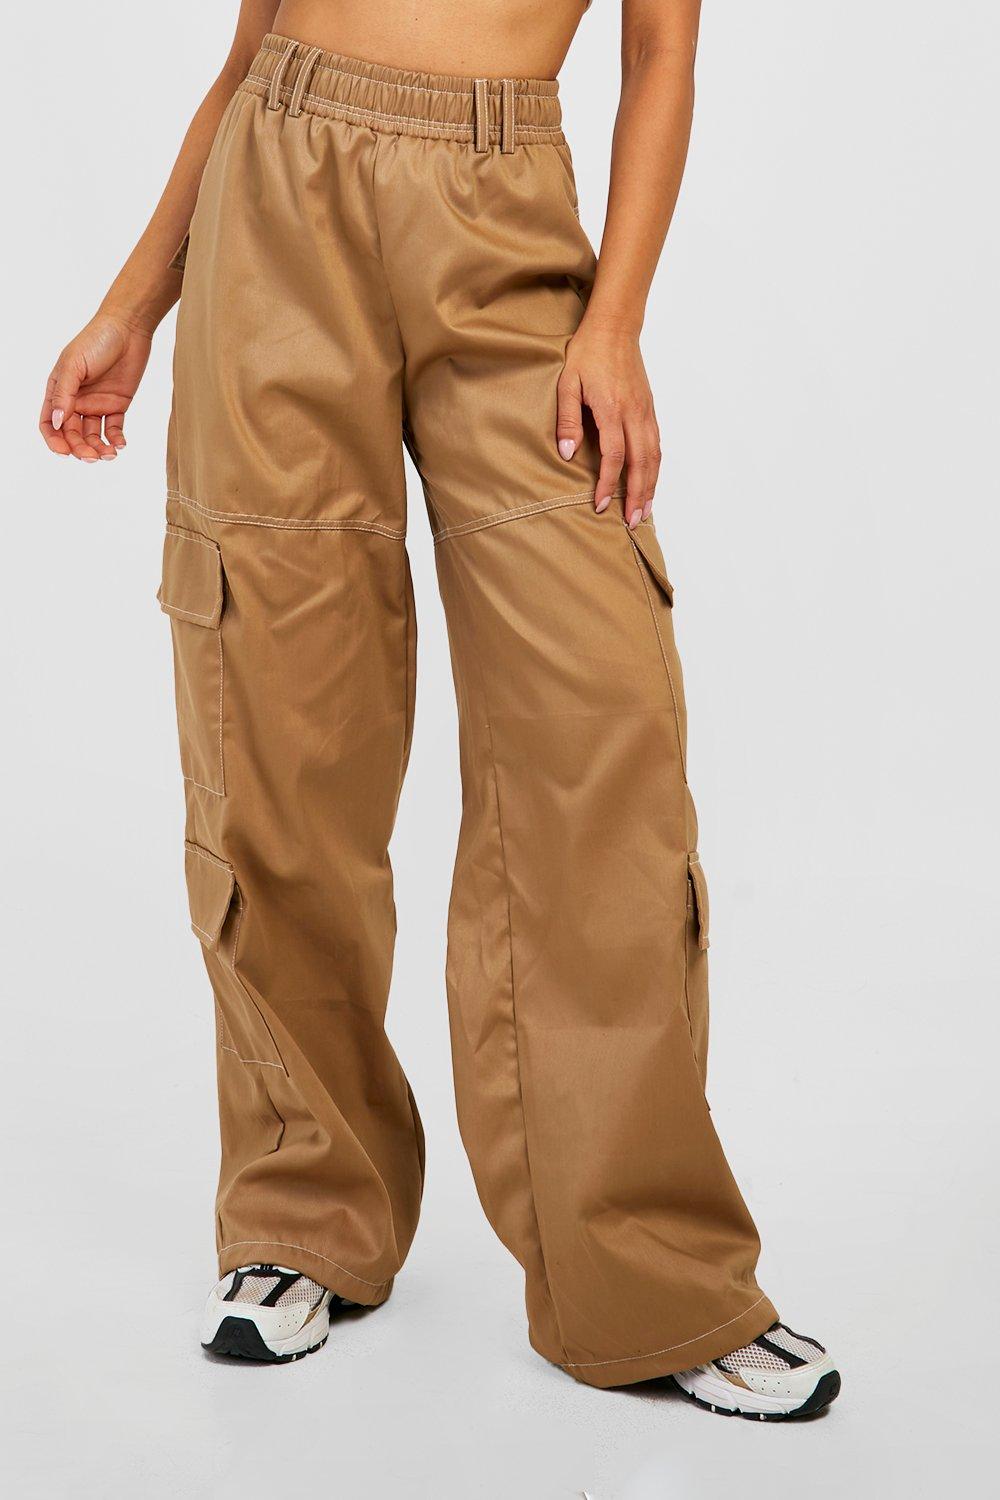 Pockets For Women - Yours Curve Brown Wide Leg Woven Cargo